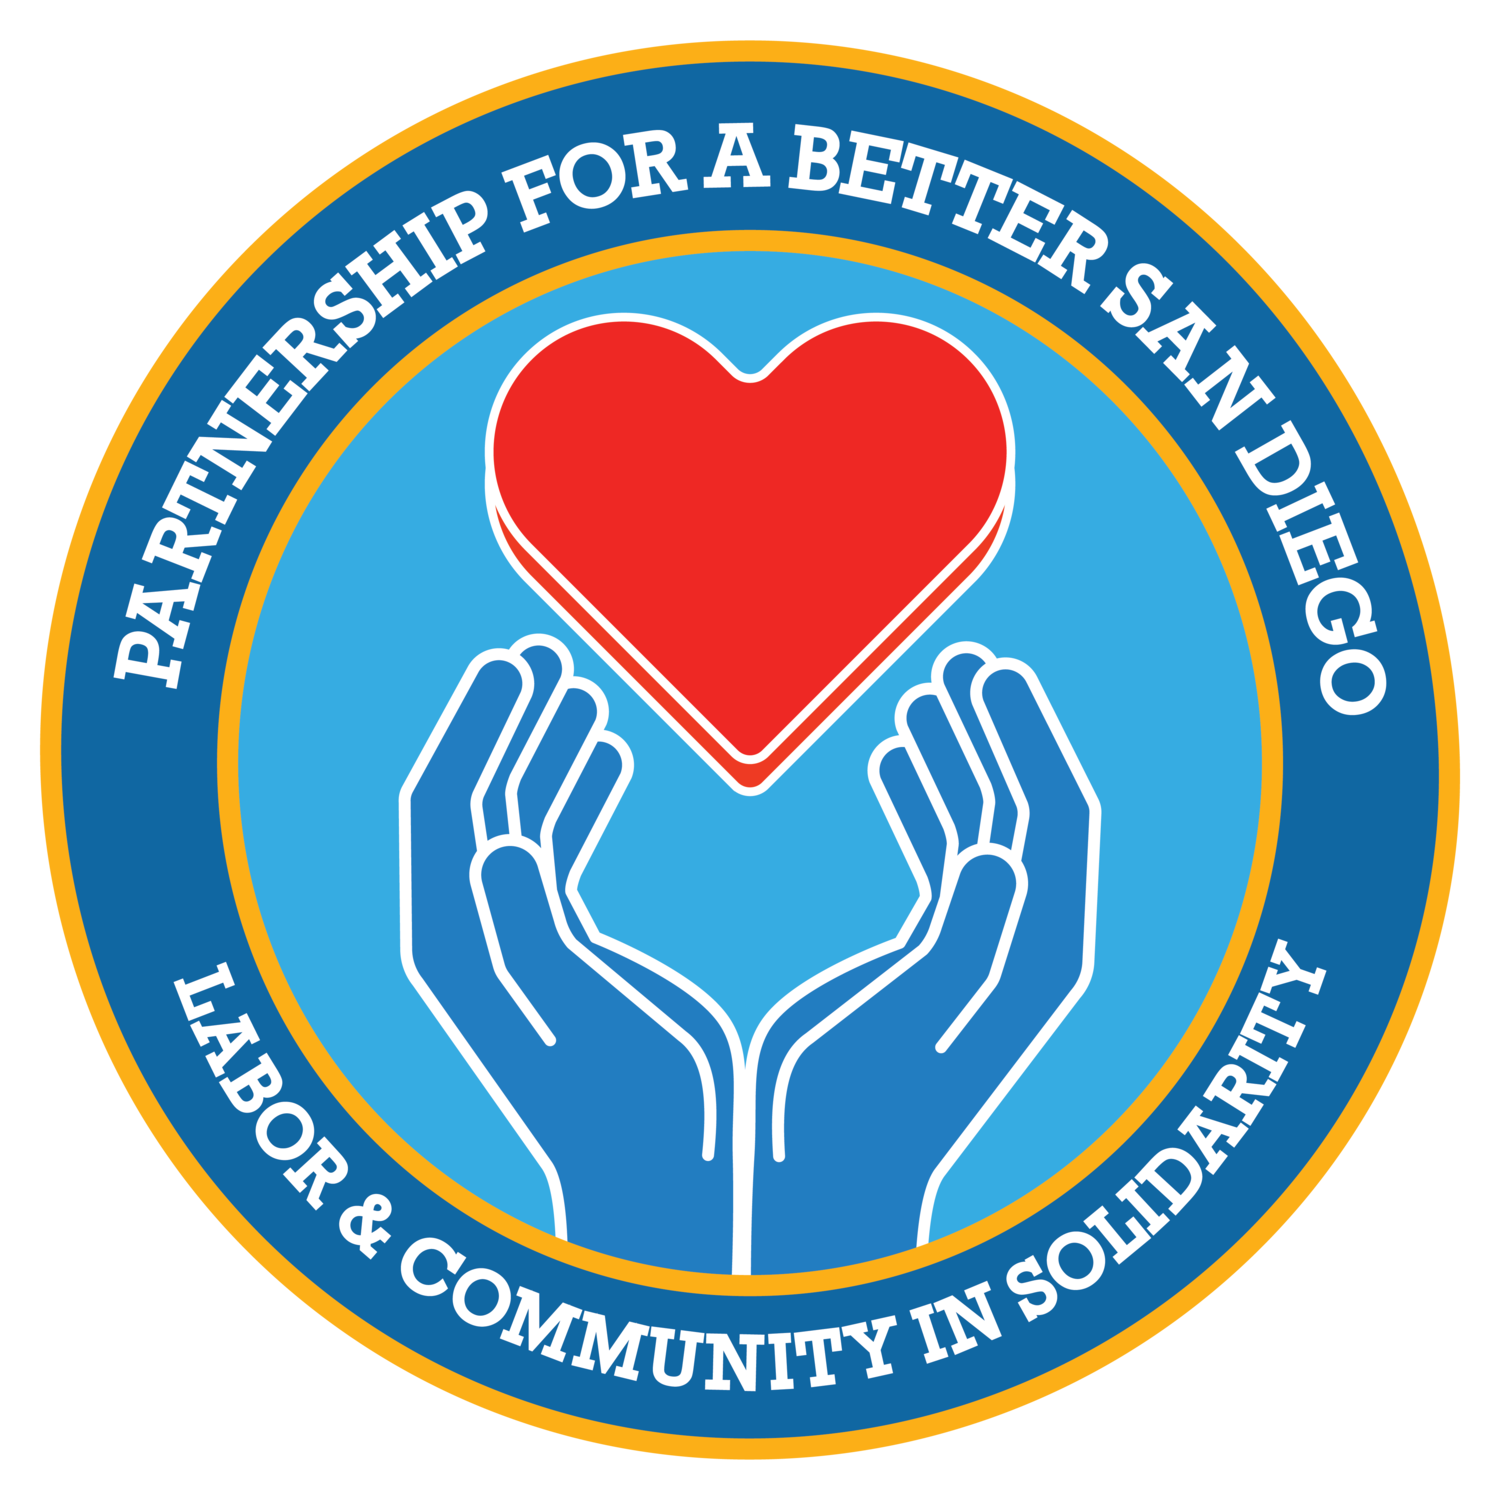 The Partnership for A Better San Diego